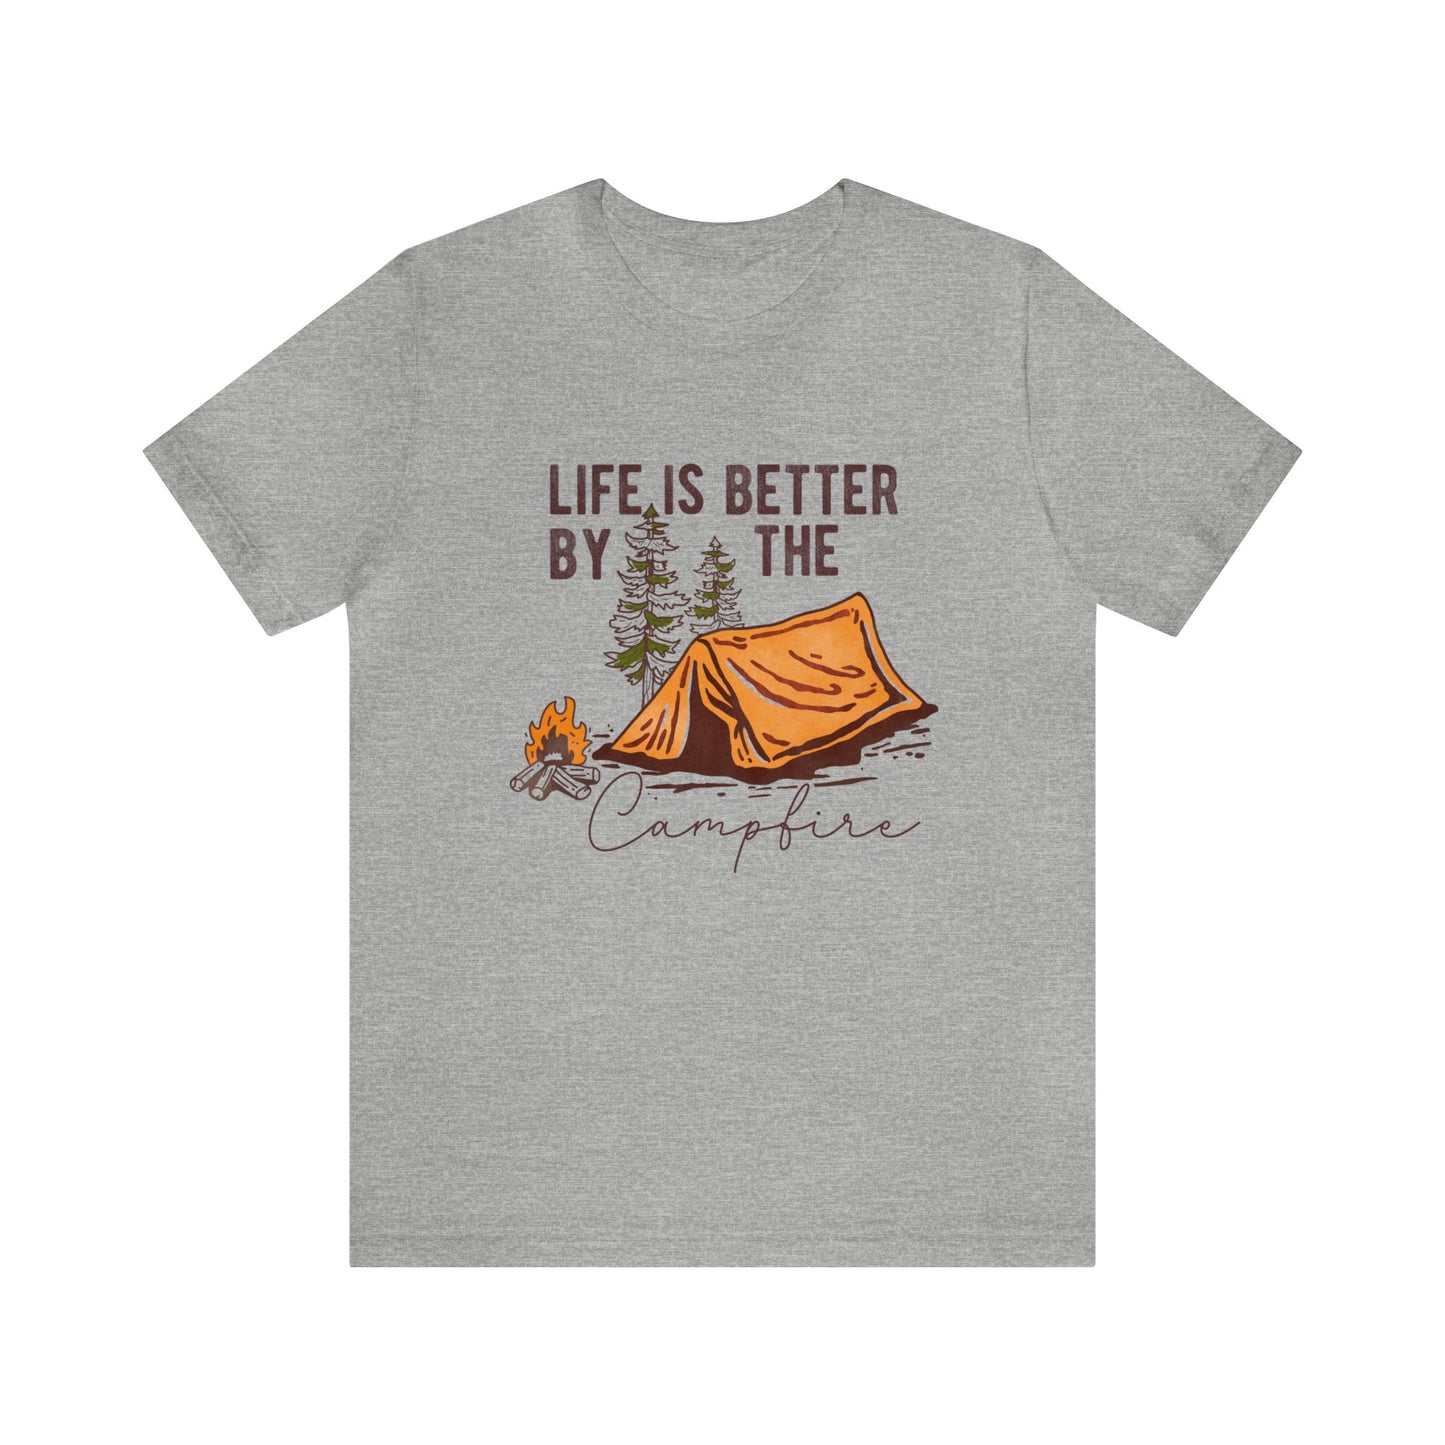 Life is better by the campfire Adult Unisex Tshirt